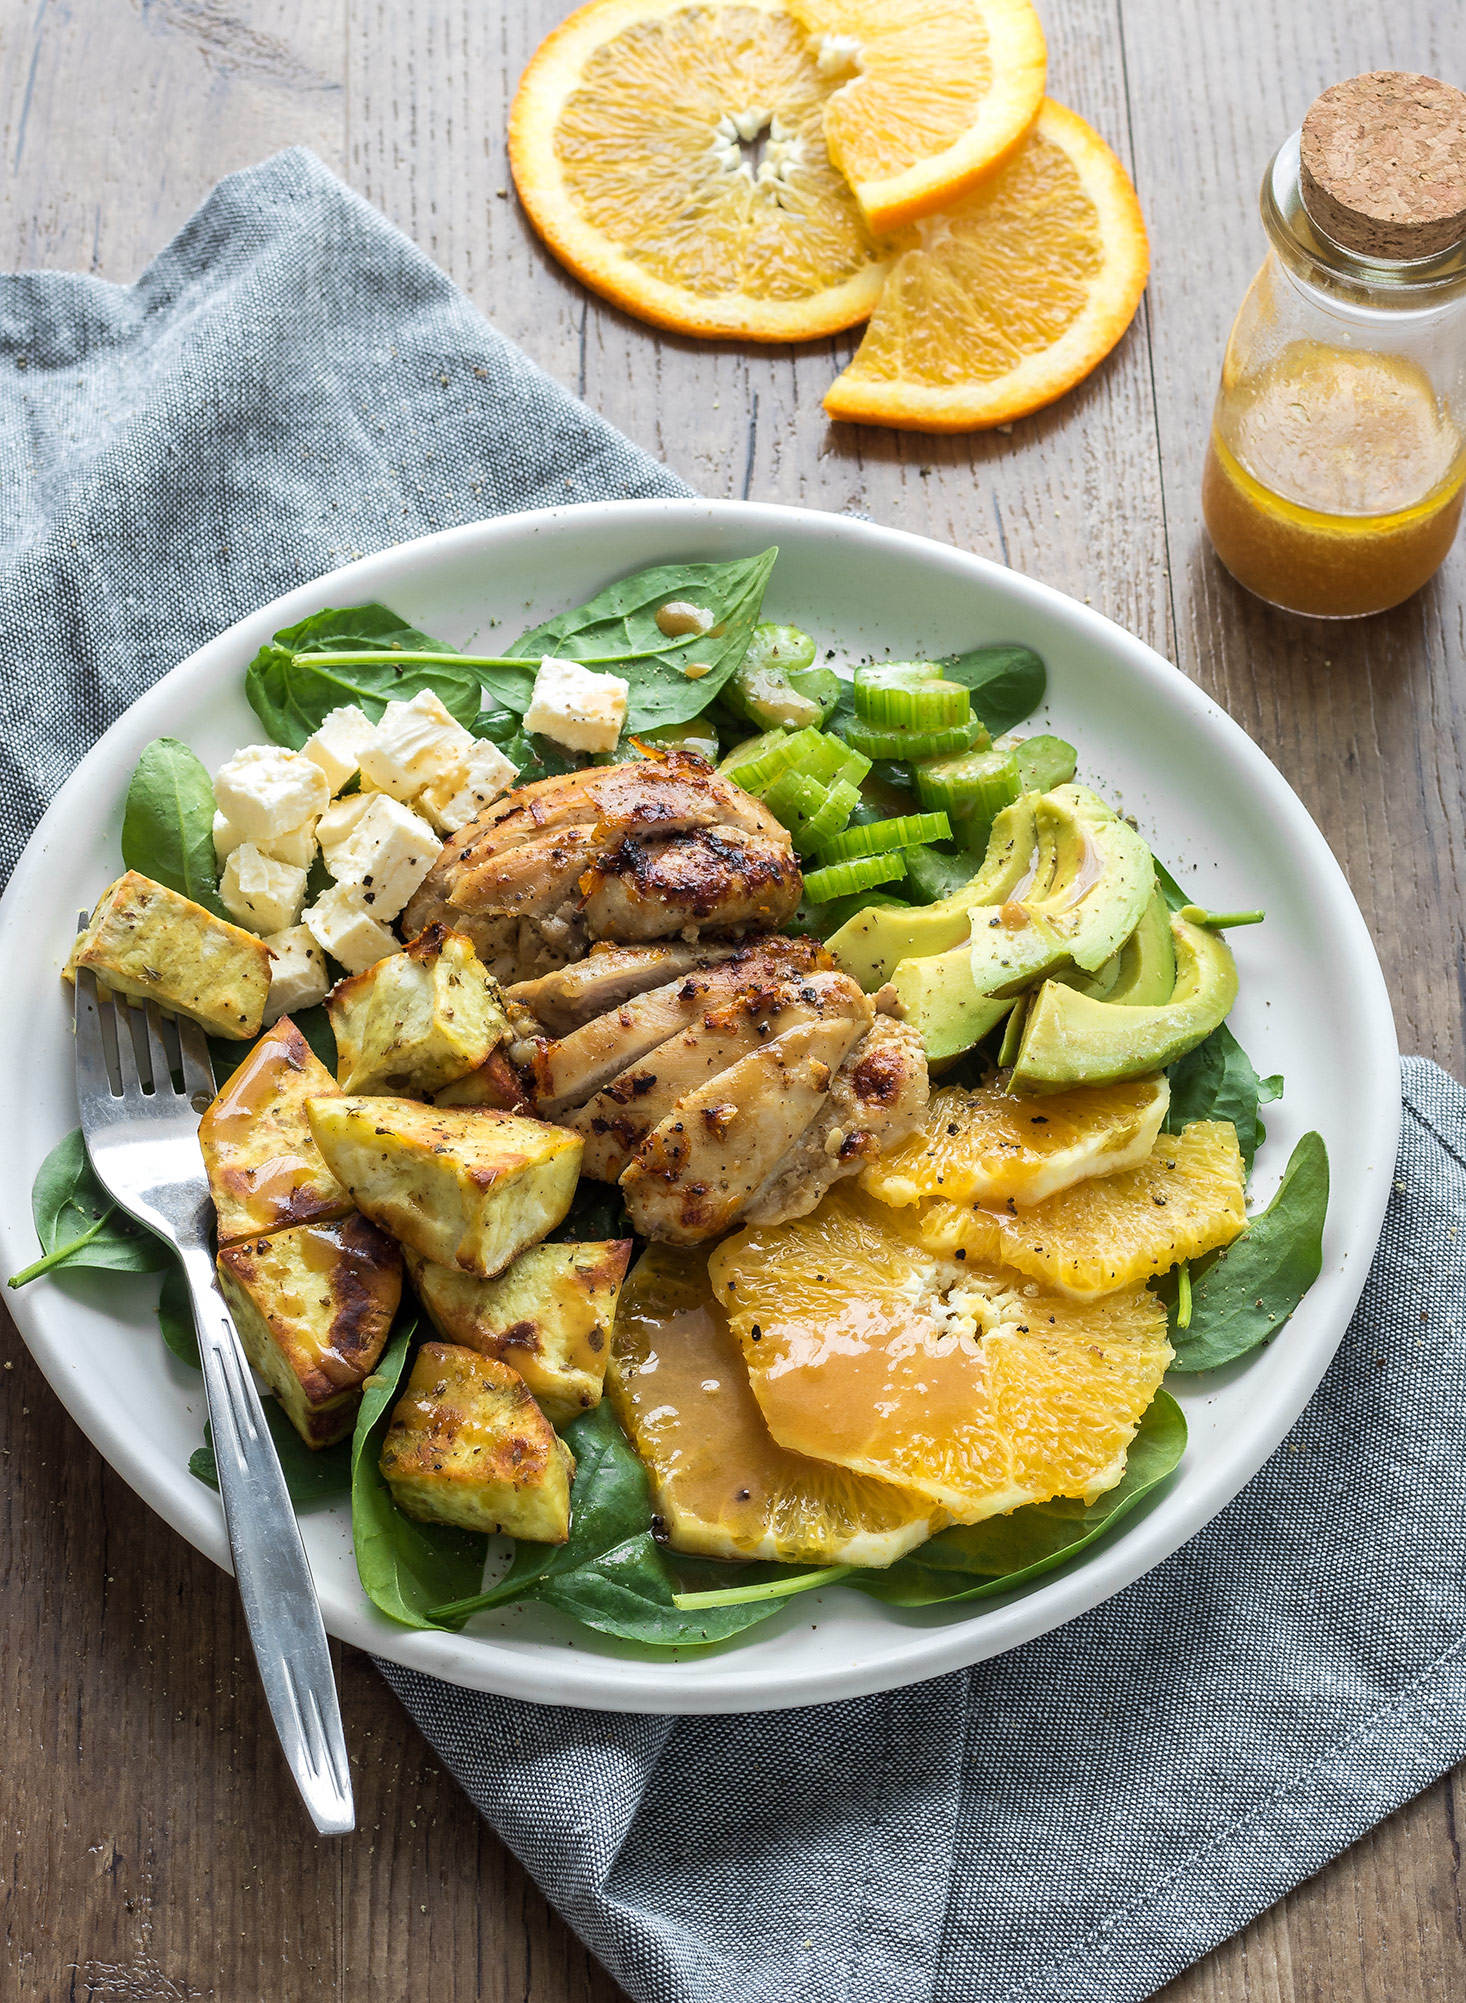 These chicken, kumara and orange salads are super easy to put together. Fresh and light but still delicious and filling.